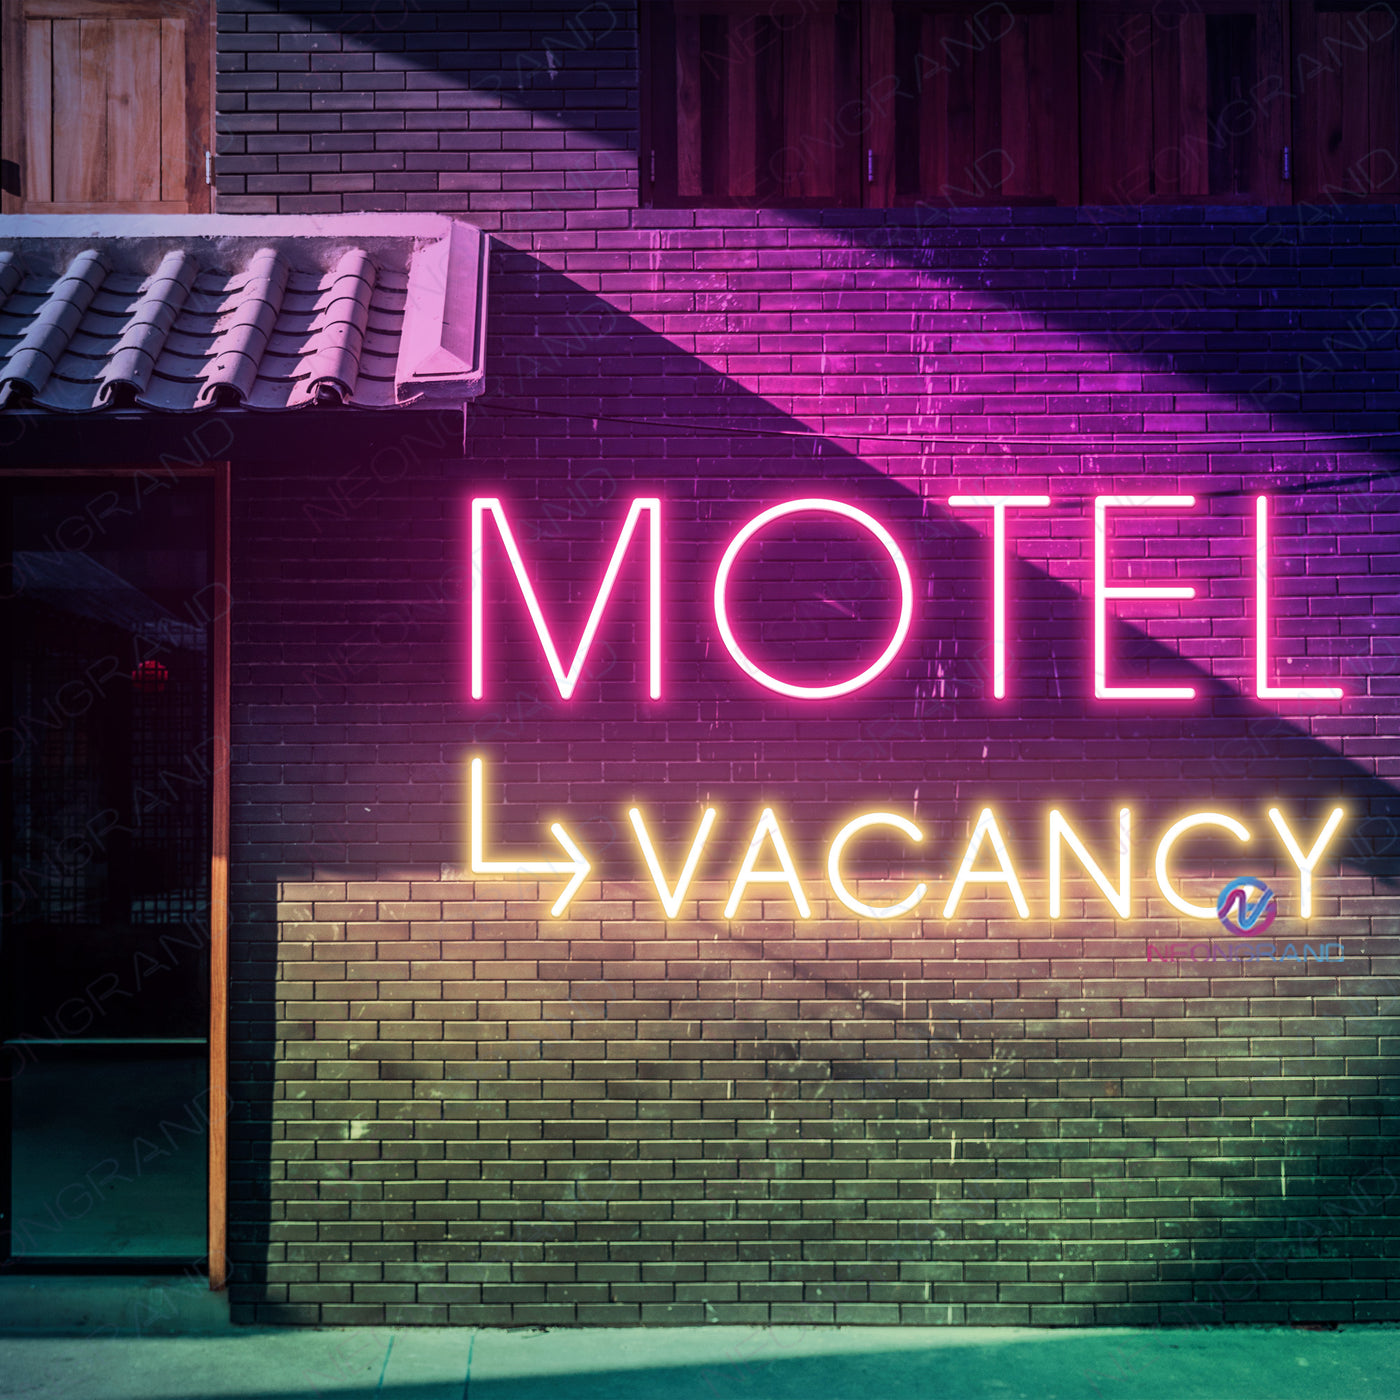 Motel Vacancy Neon Sign Business Led Light